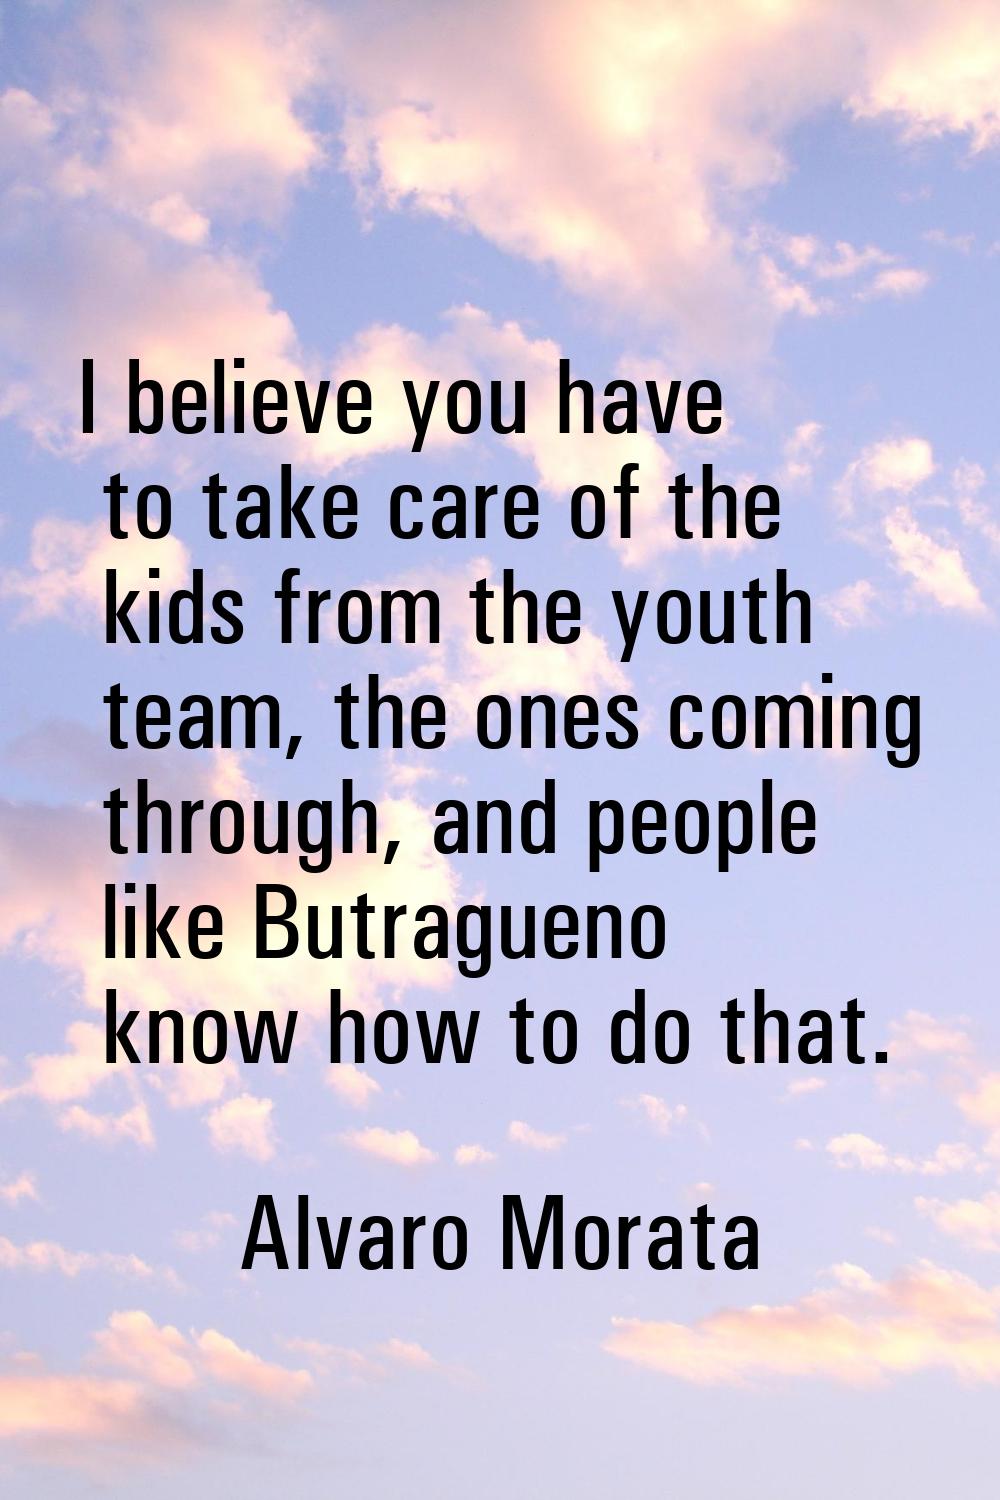 I believe you have to take care of the kids from the youth team, the ones coming through, and peopl